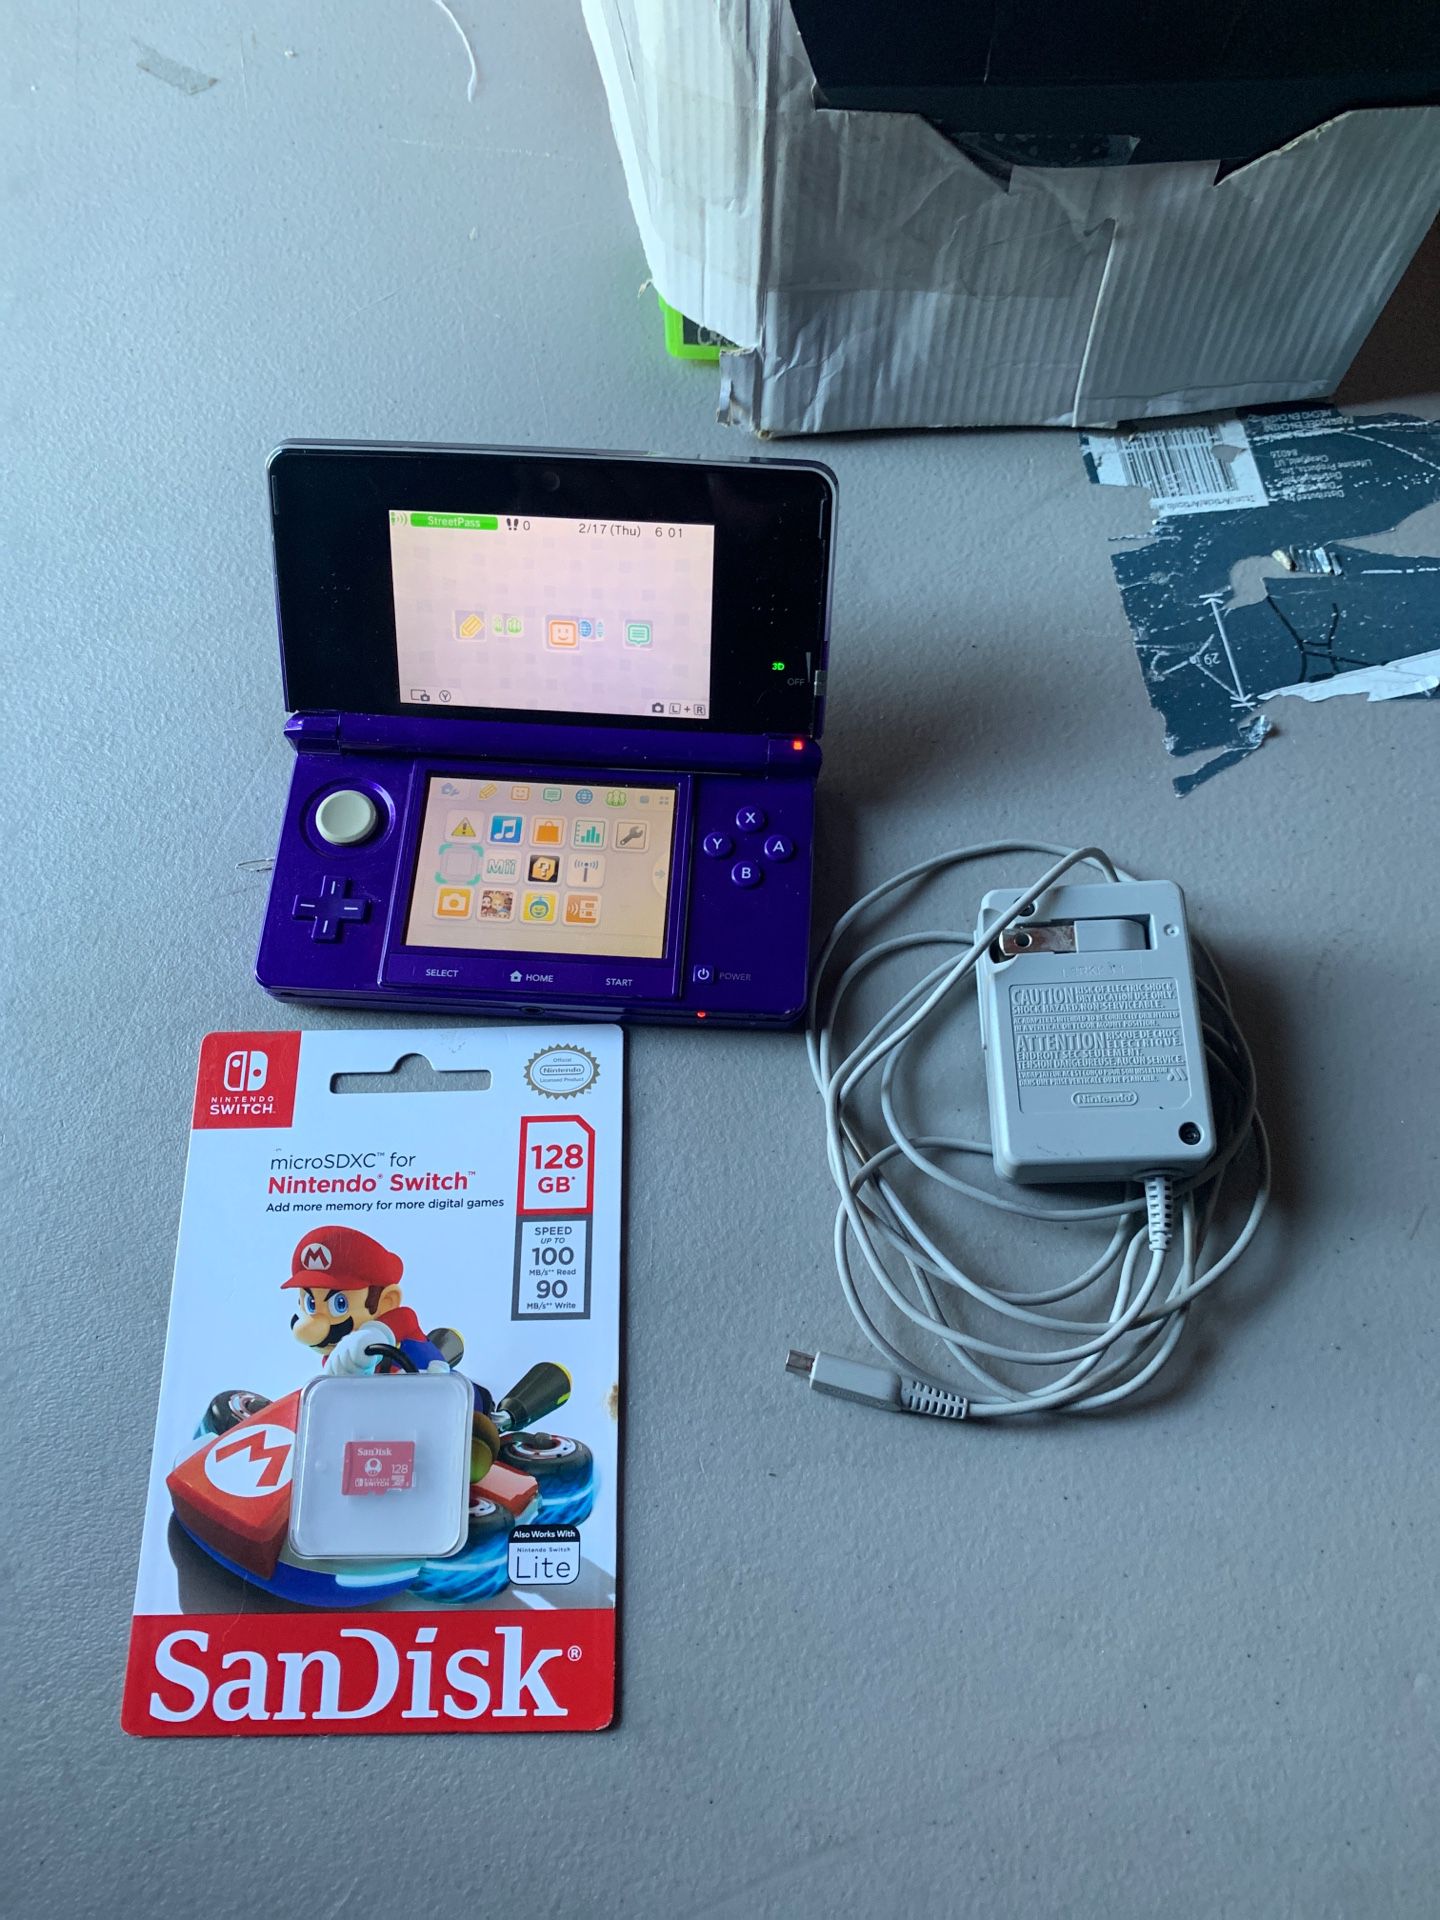 Nintendo 3DS with 128 GB SD card